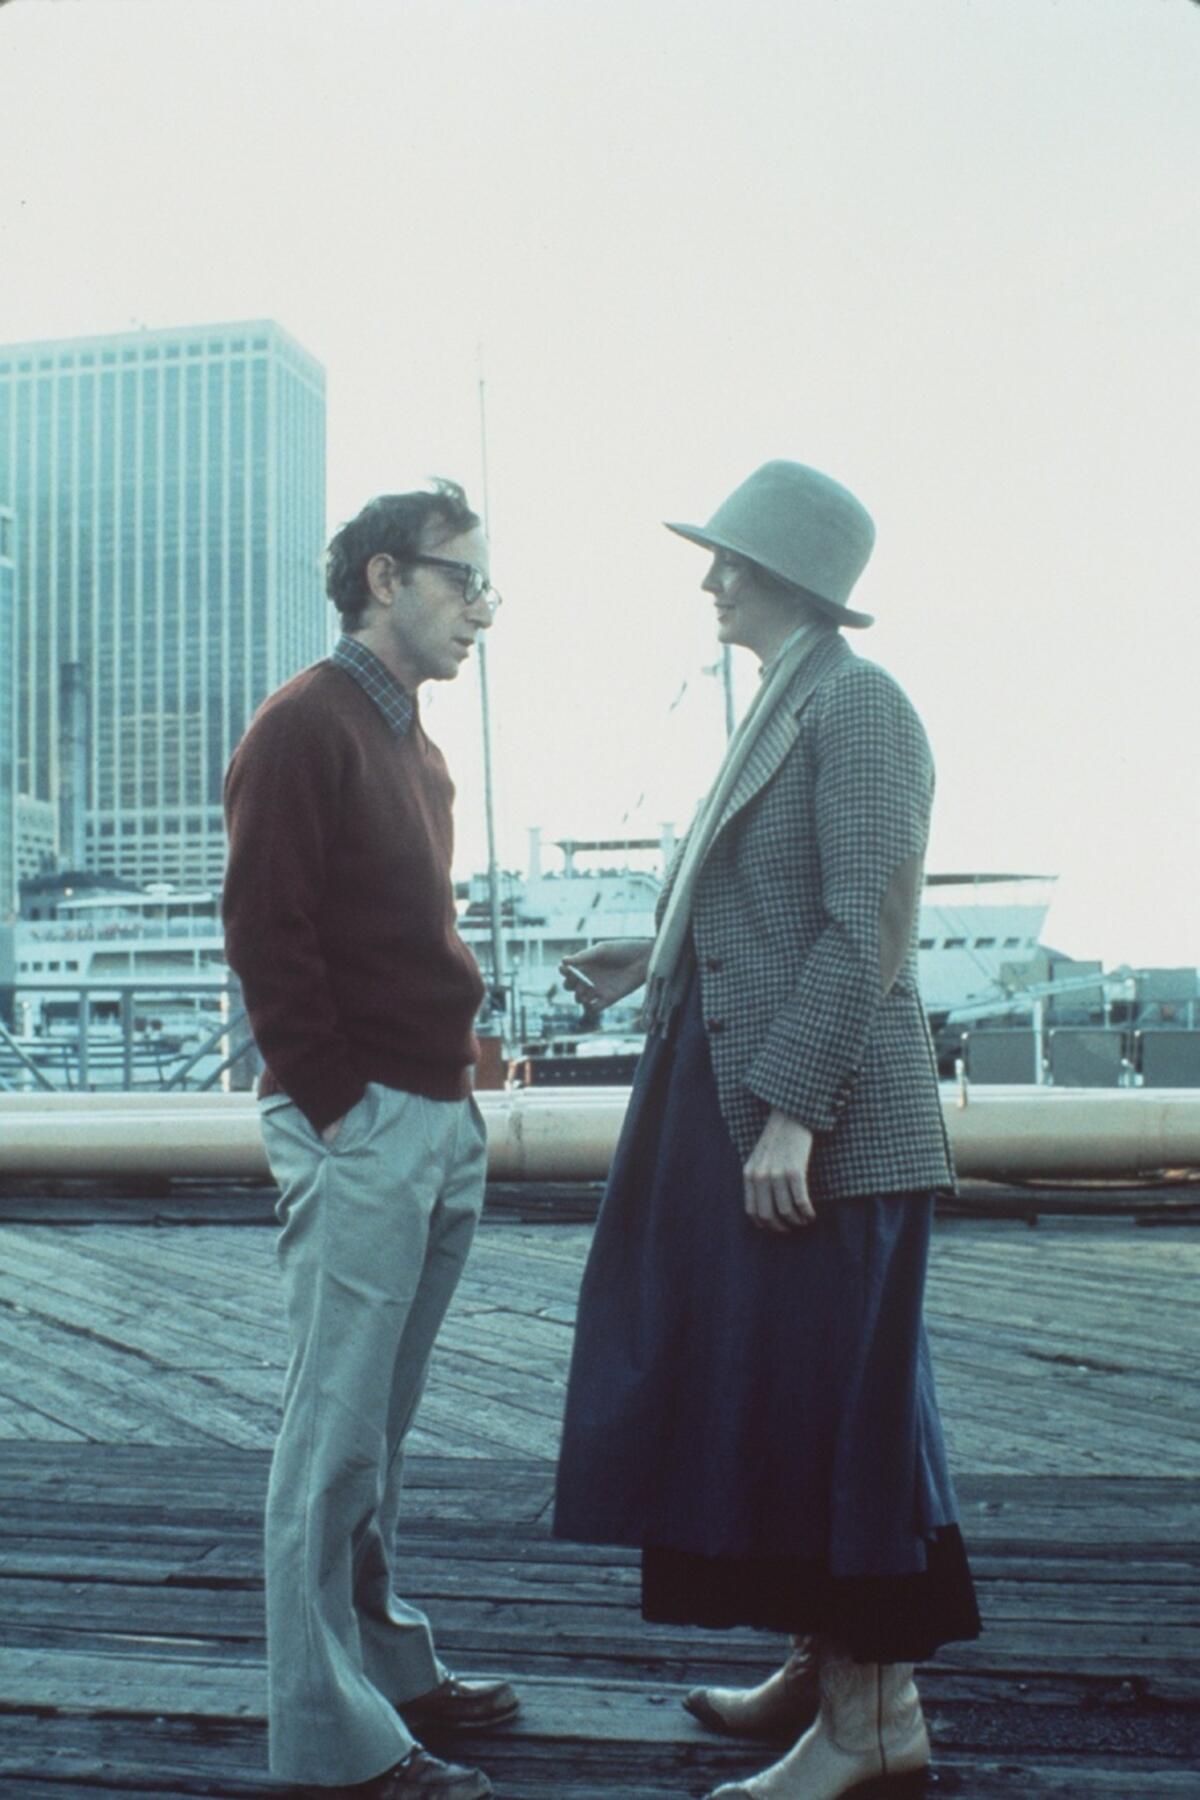 A man and woman talk outside with a tall building looming behind them.